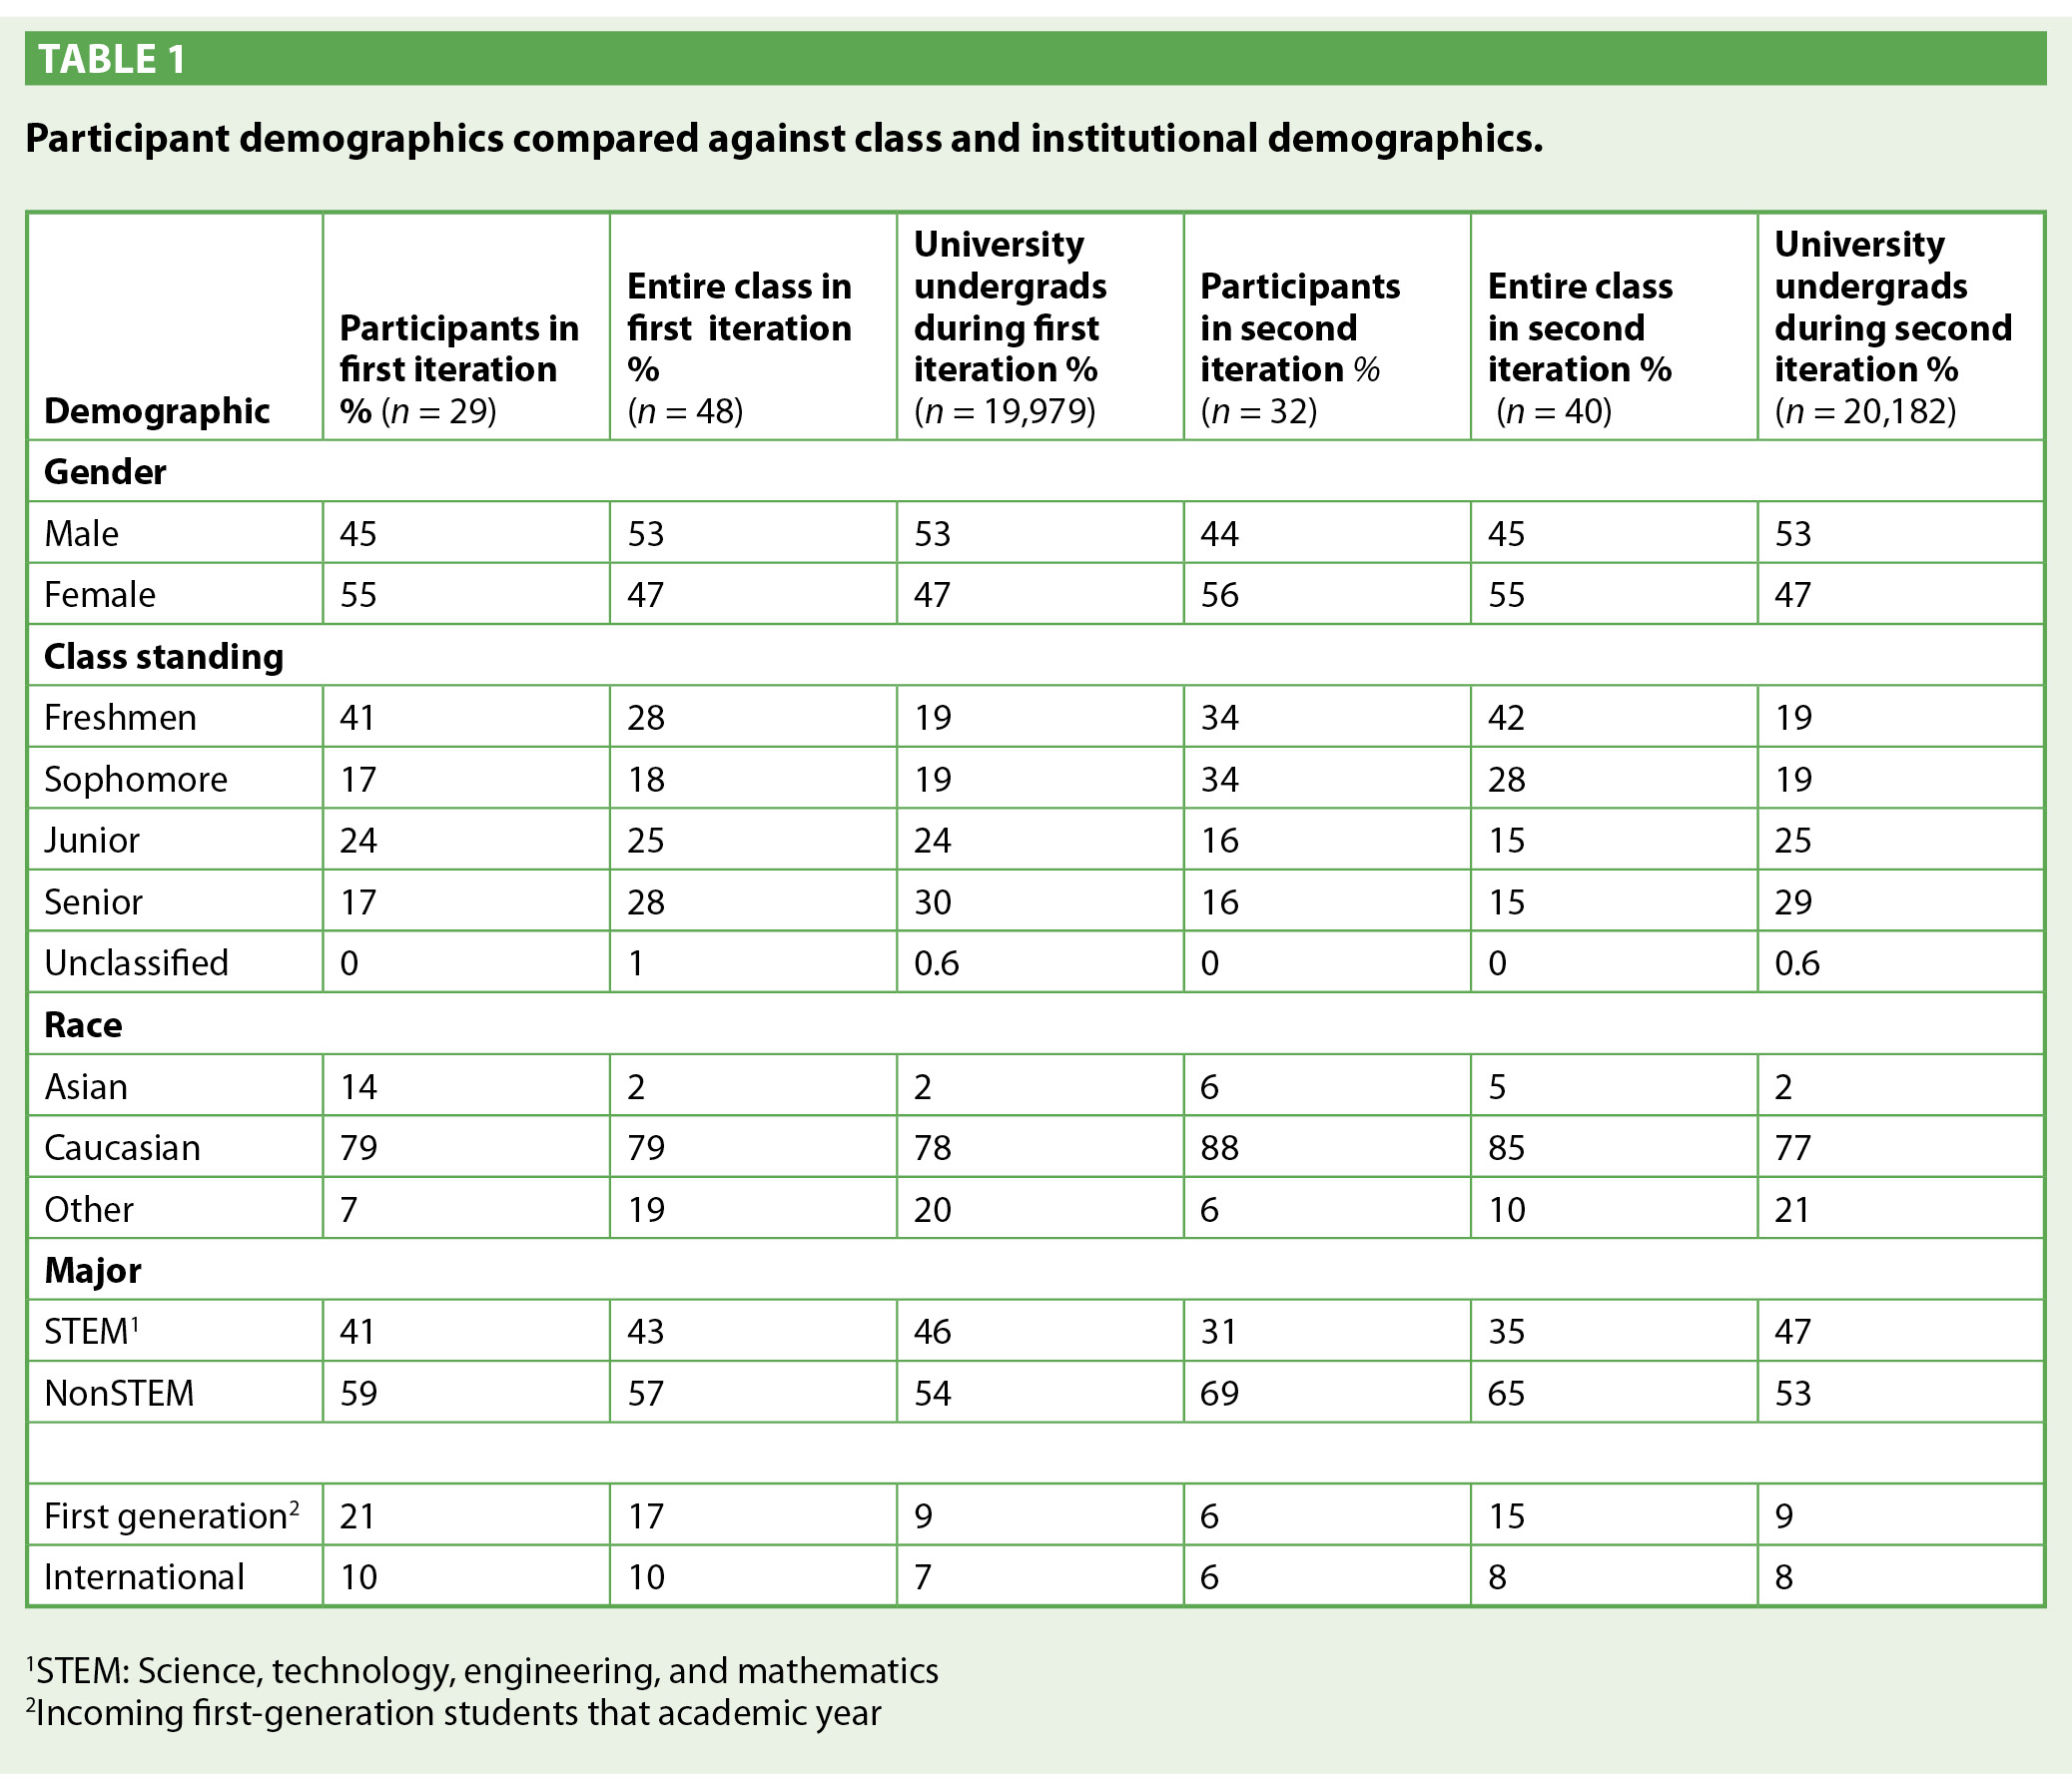 Table 1. Participant demographics compared against class and institutional demographics.